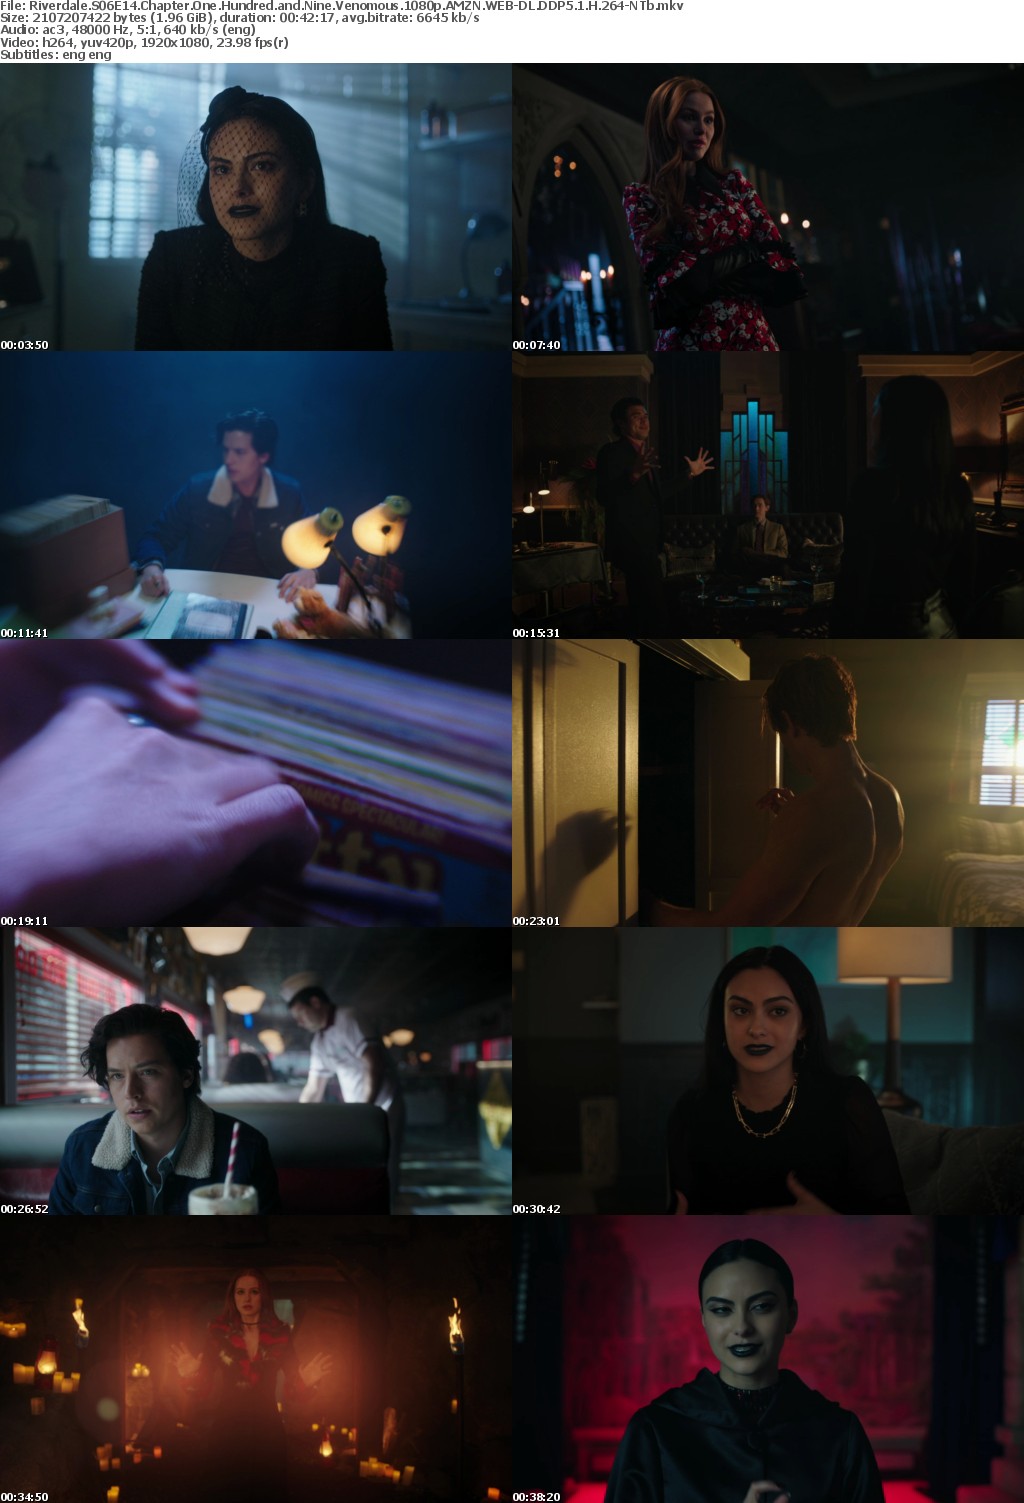 Riverdale US S06E14 Chapter One Hundred and Nine Venomous 1080p AMZN WEBRip DDP5 1 x264-NTb